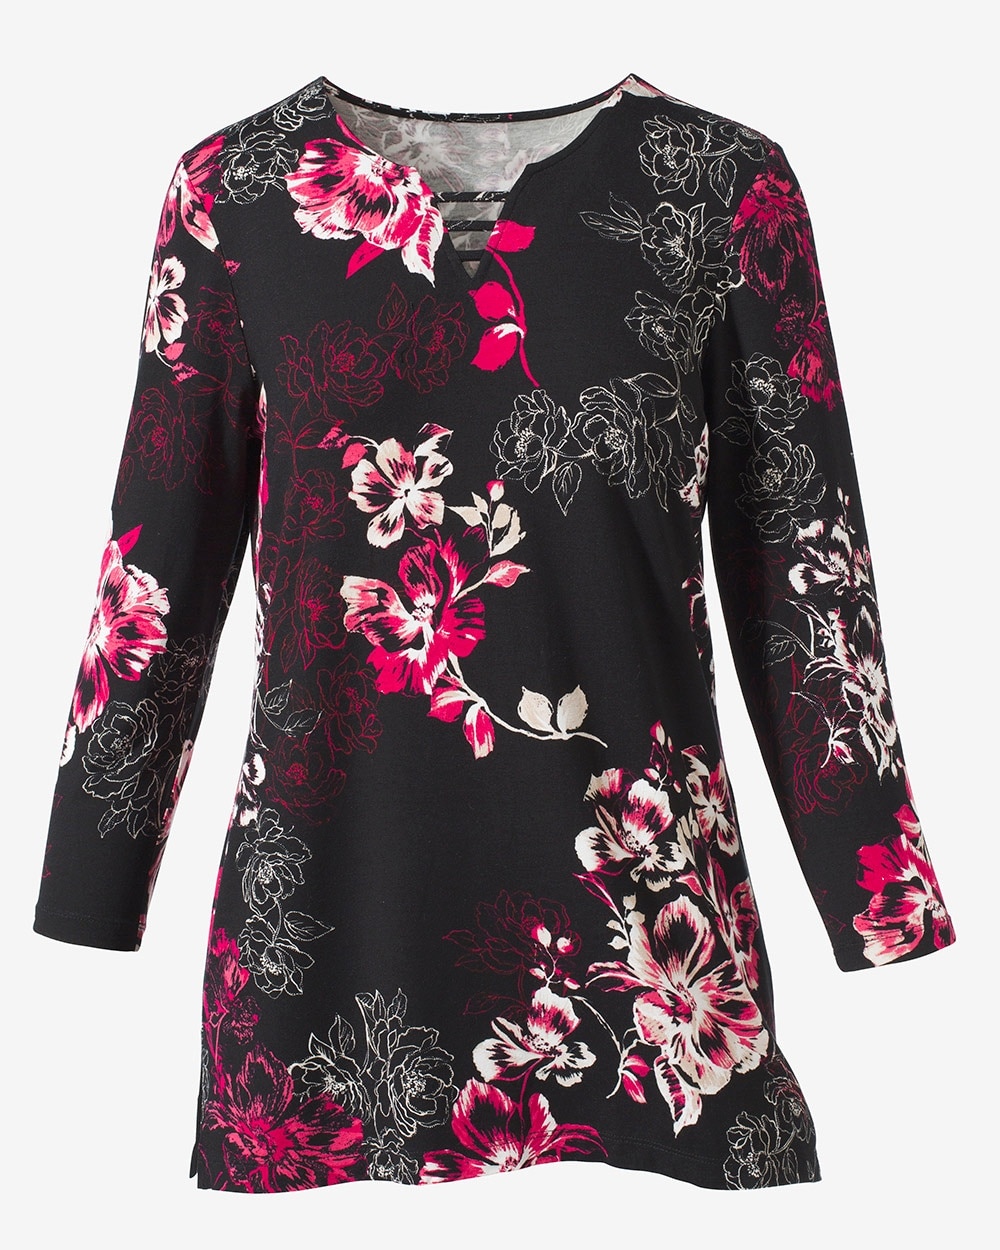 Floral Embroidery 3/4-Sleeve Tunic